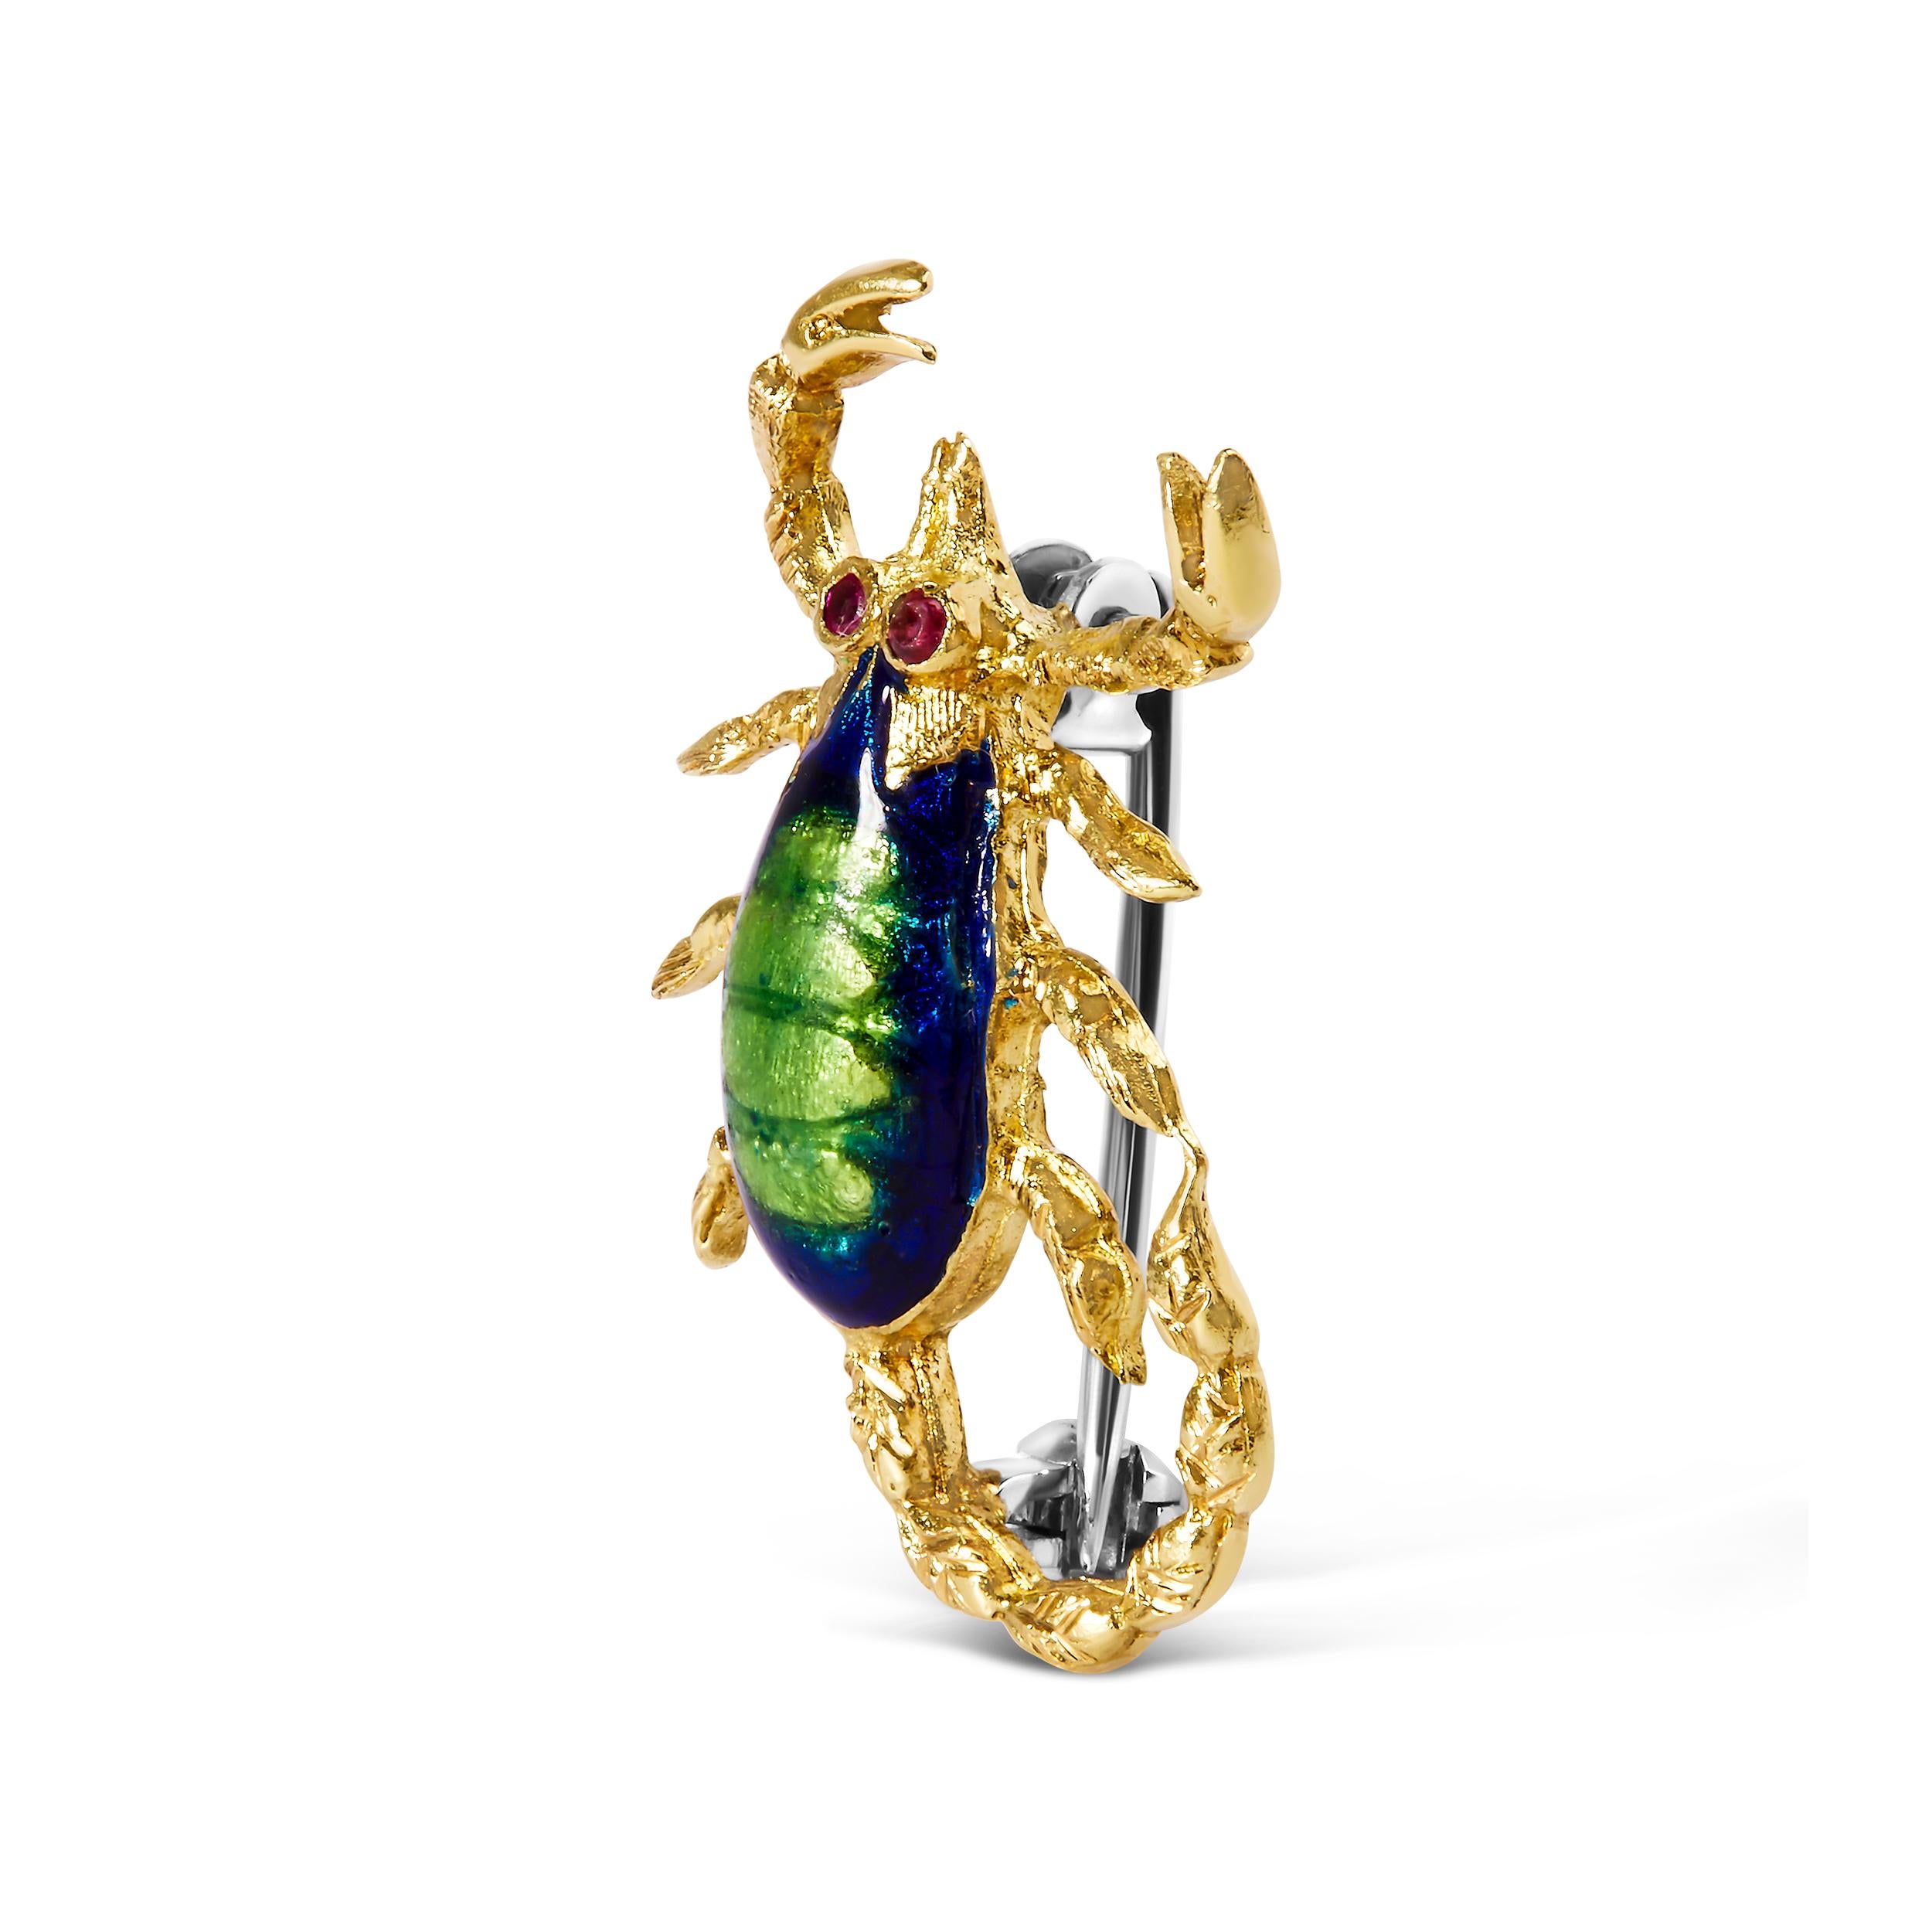 Introducing an exquisite masterpiece that embodies elegance and allure - an 18K Yellow Gold and Pink Sapphire Enamel Scorpion Brooch Pin. Crafted with precision, this enchanting piece is designed to captivate both women and men with its unique